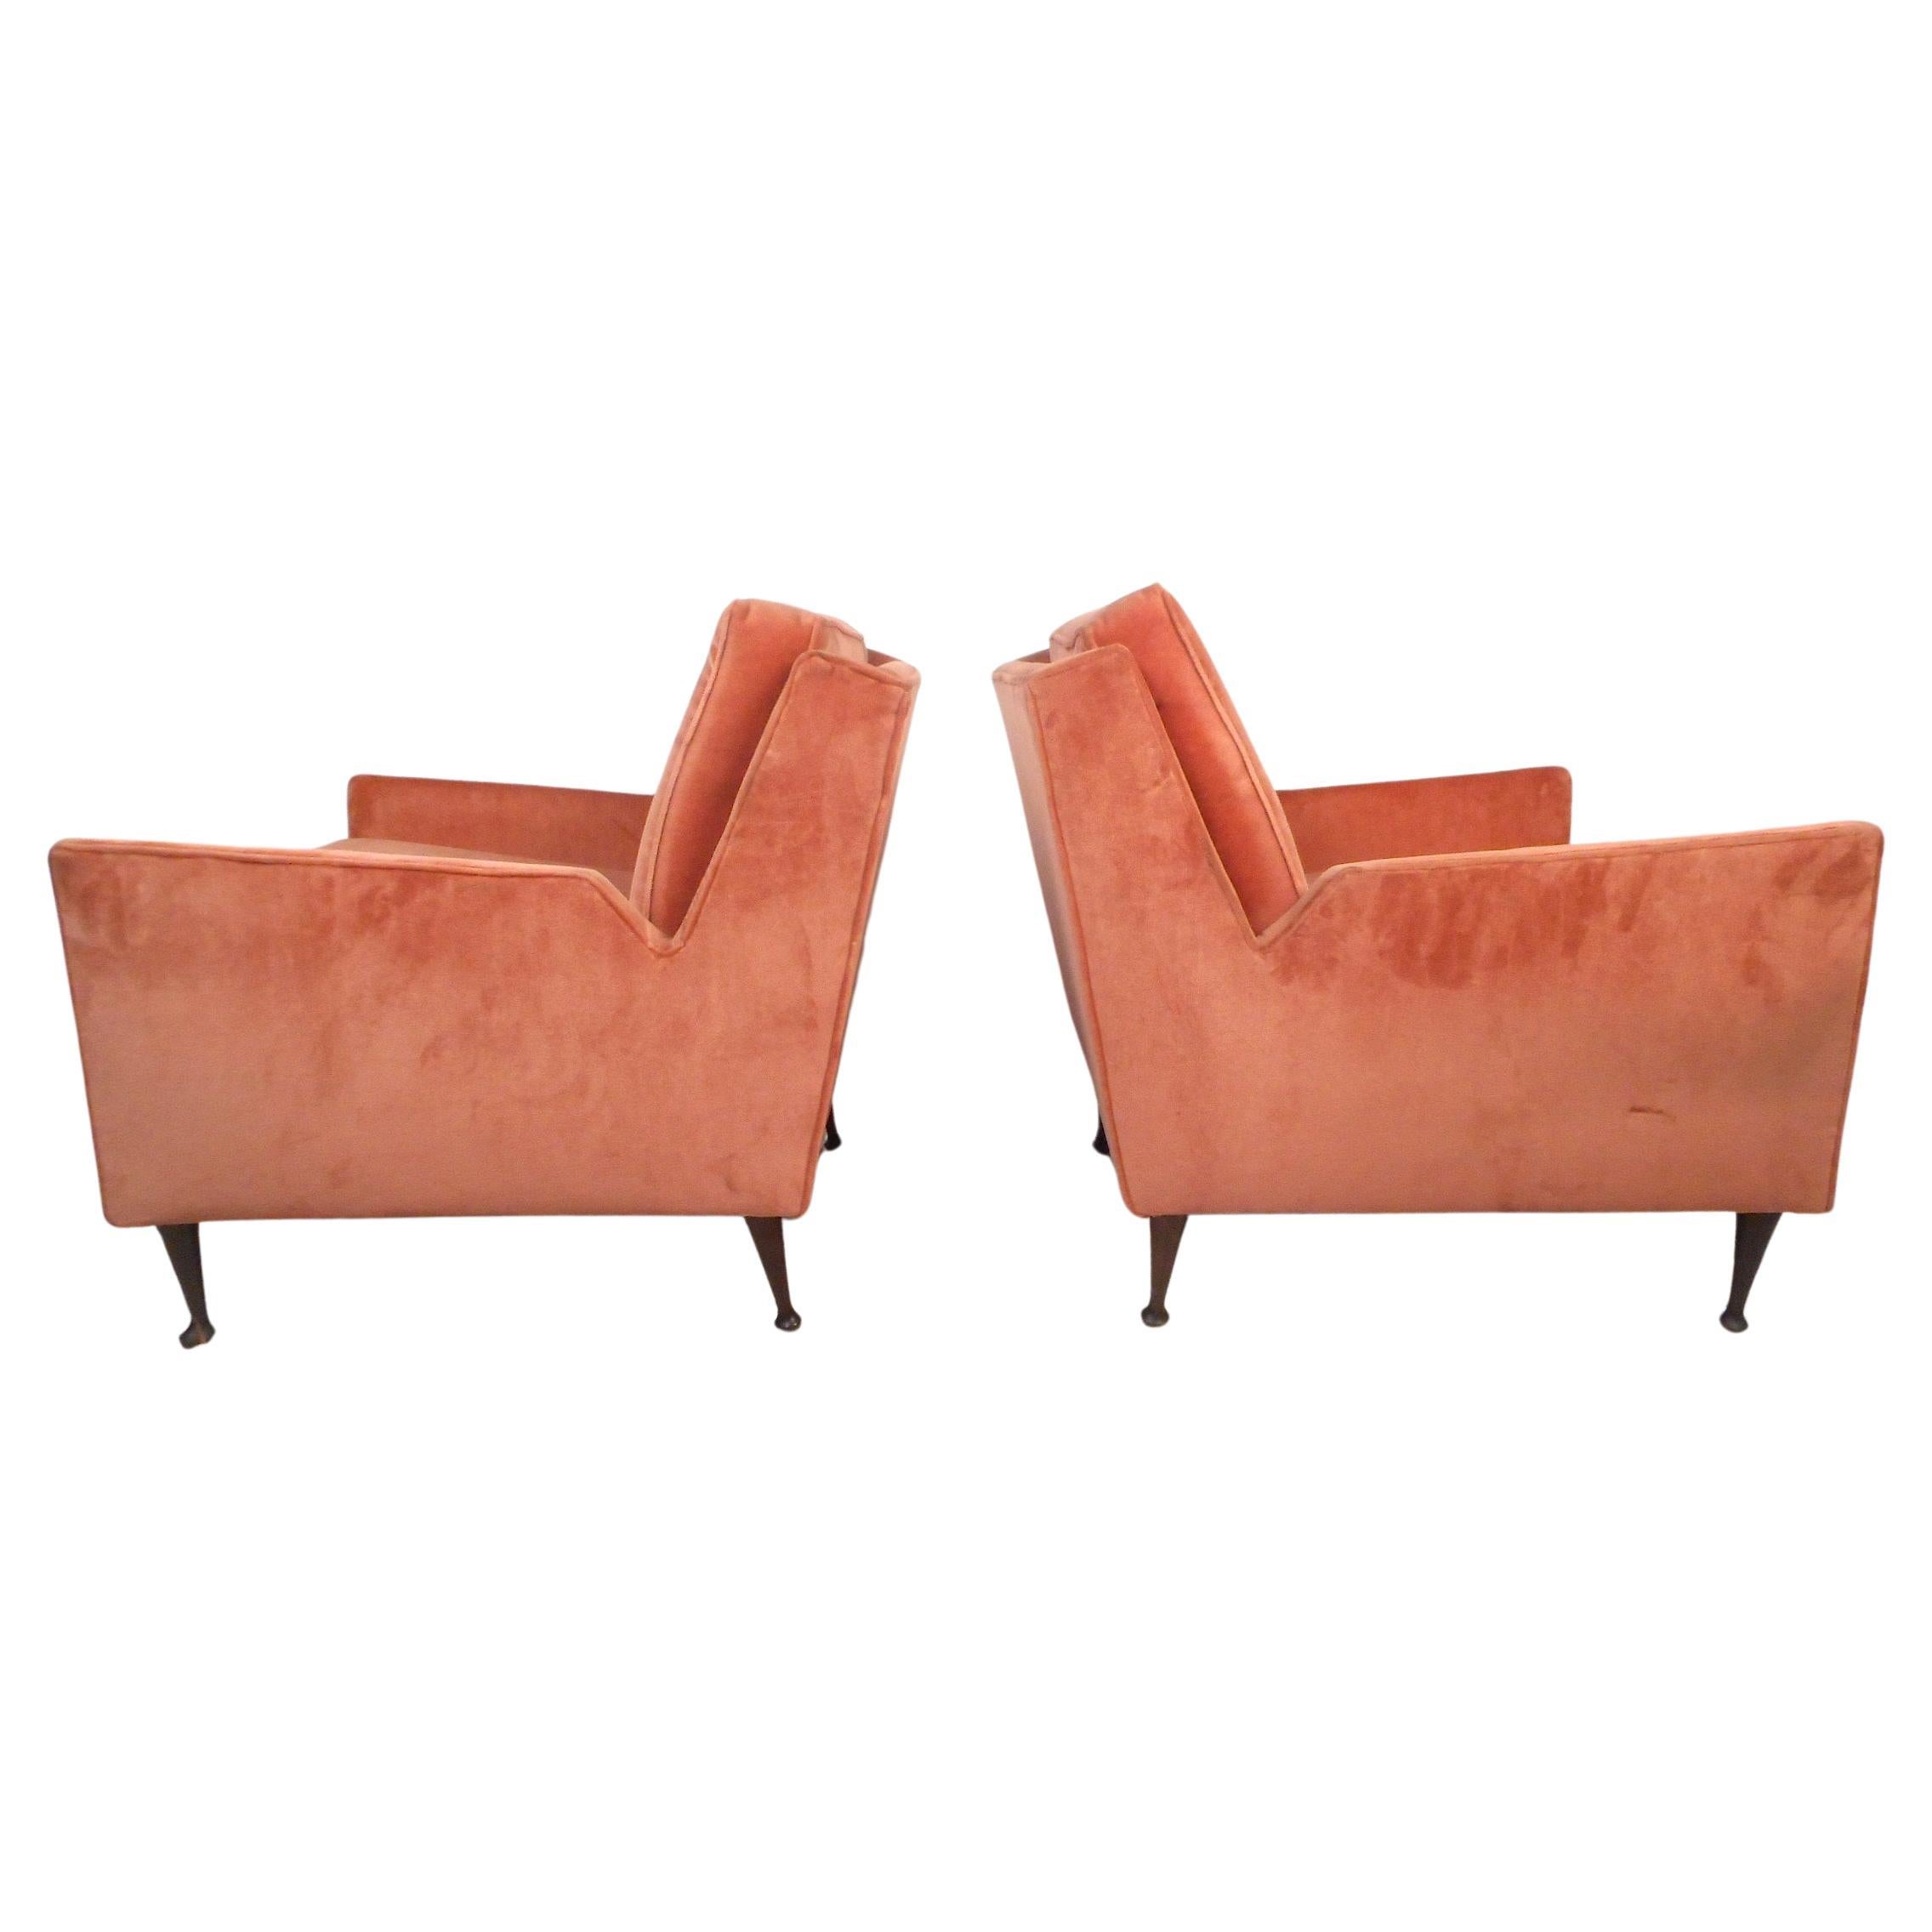 Pair of Midcentury Lounge Chairs after McCobb For Sale